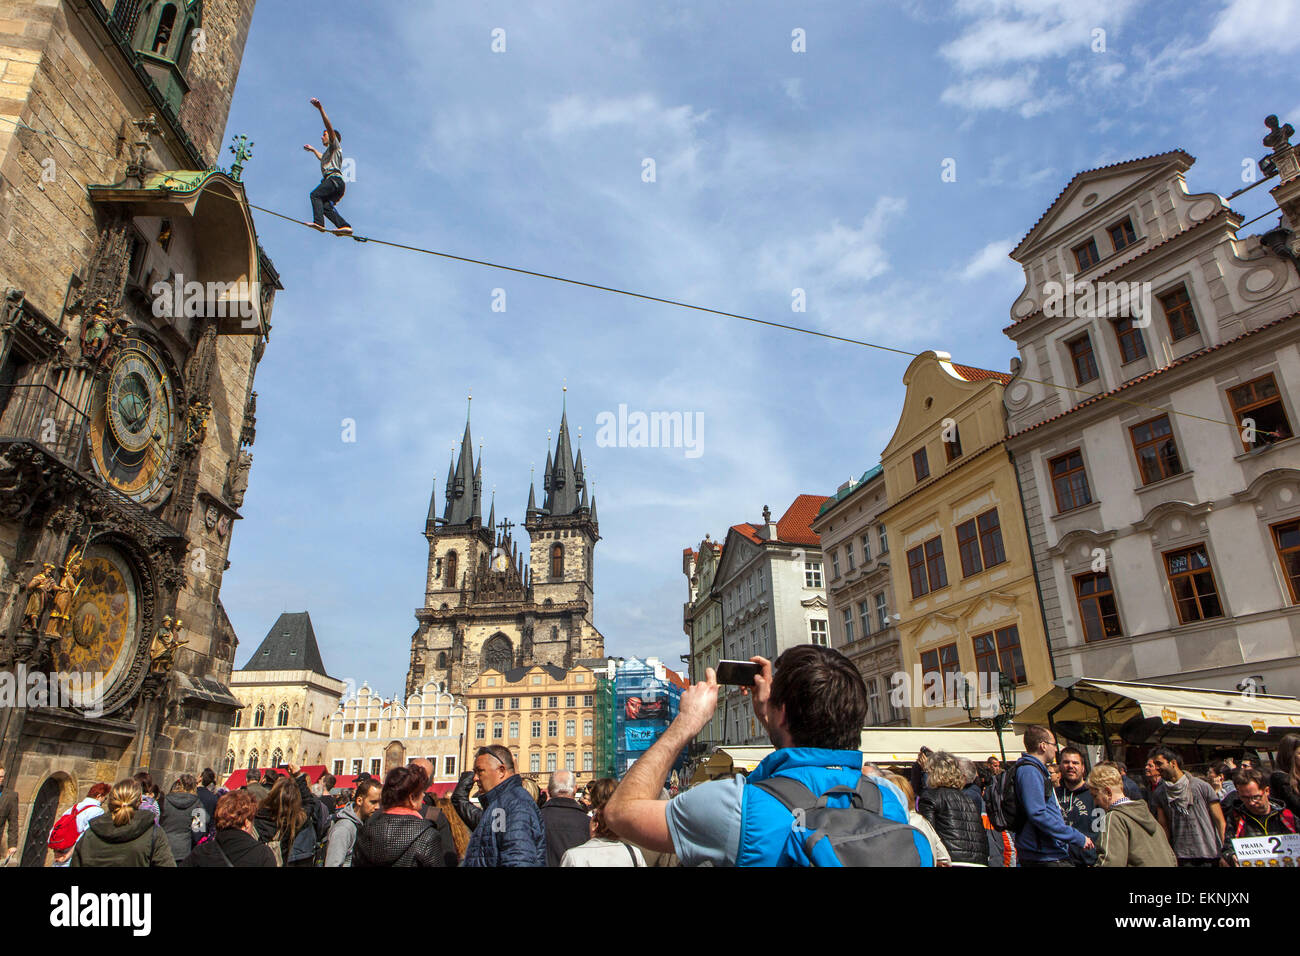 Tightrope walker on the lane in front of the Prague Astronomical Clock, Old Town Square Prague street show Stock Photo